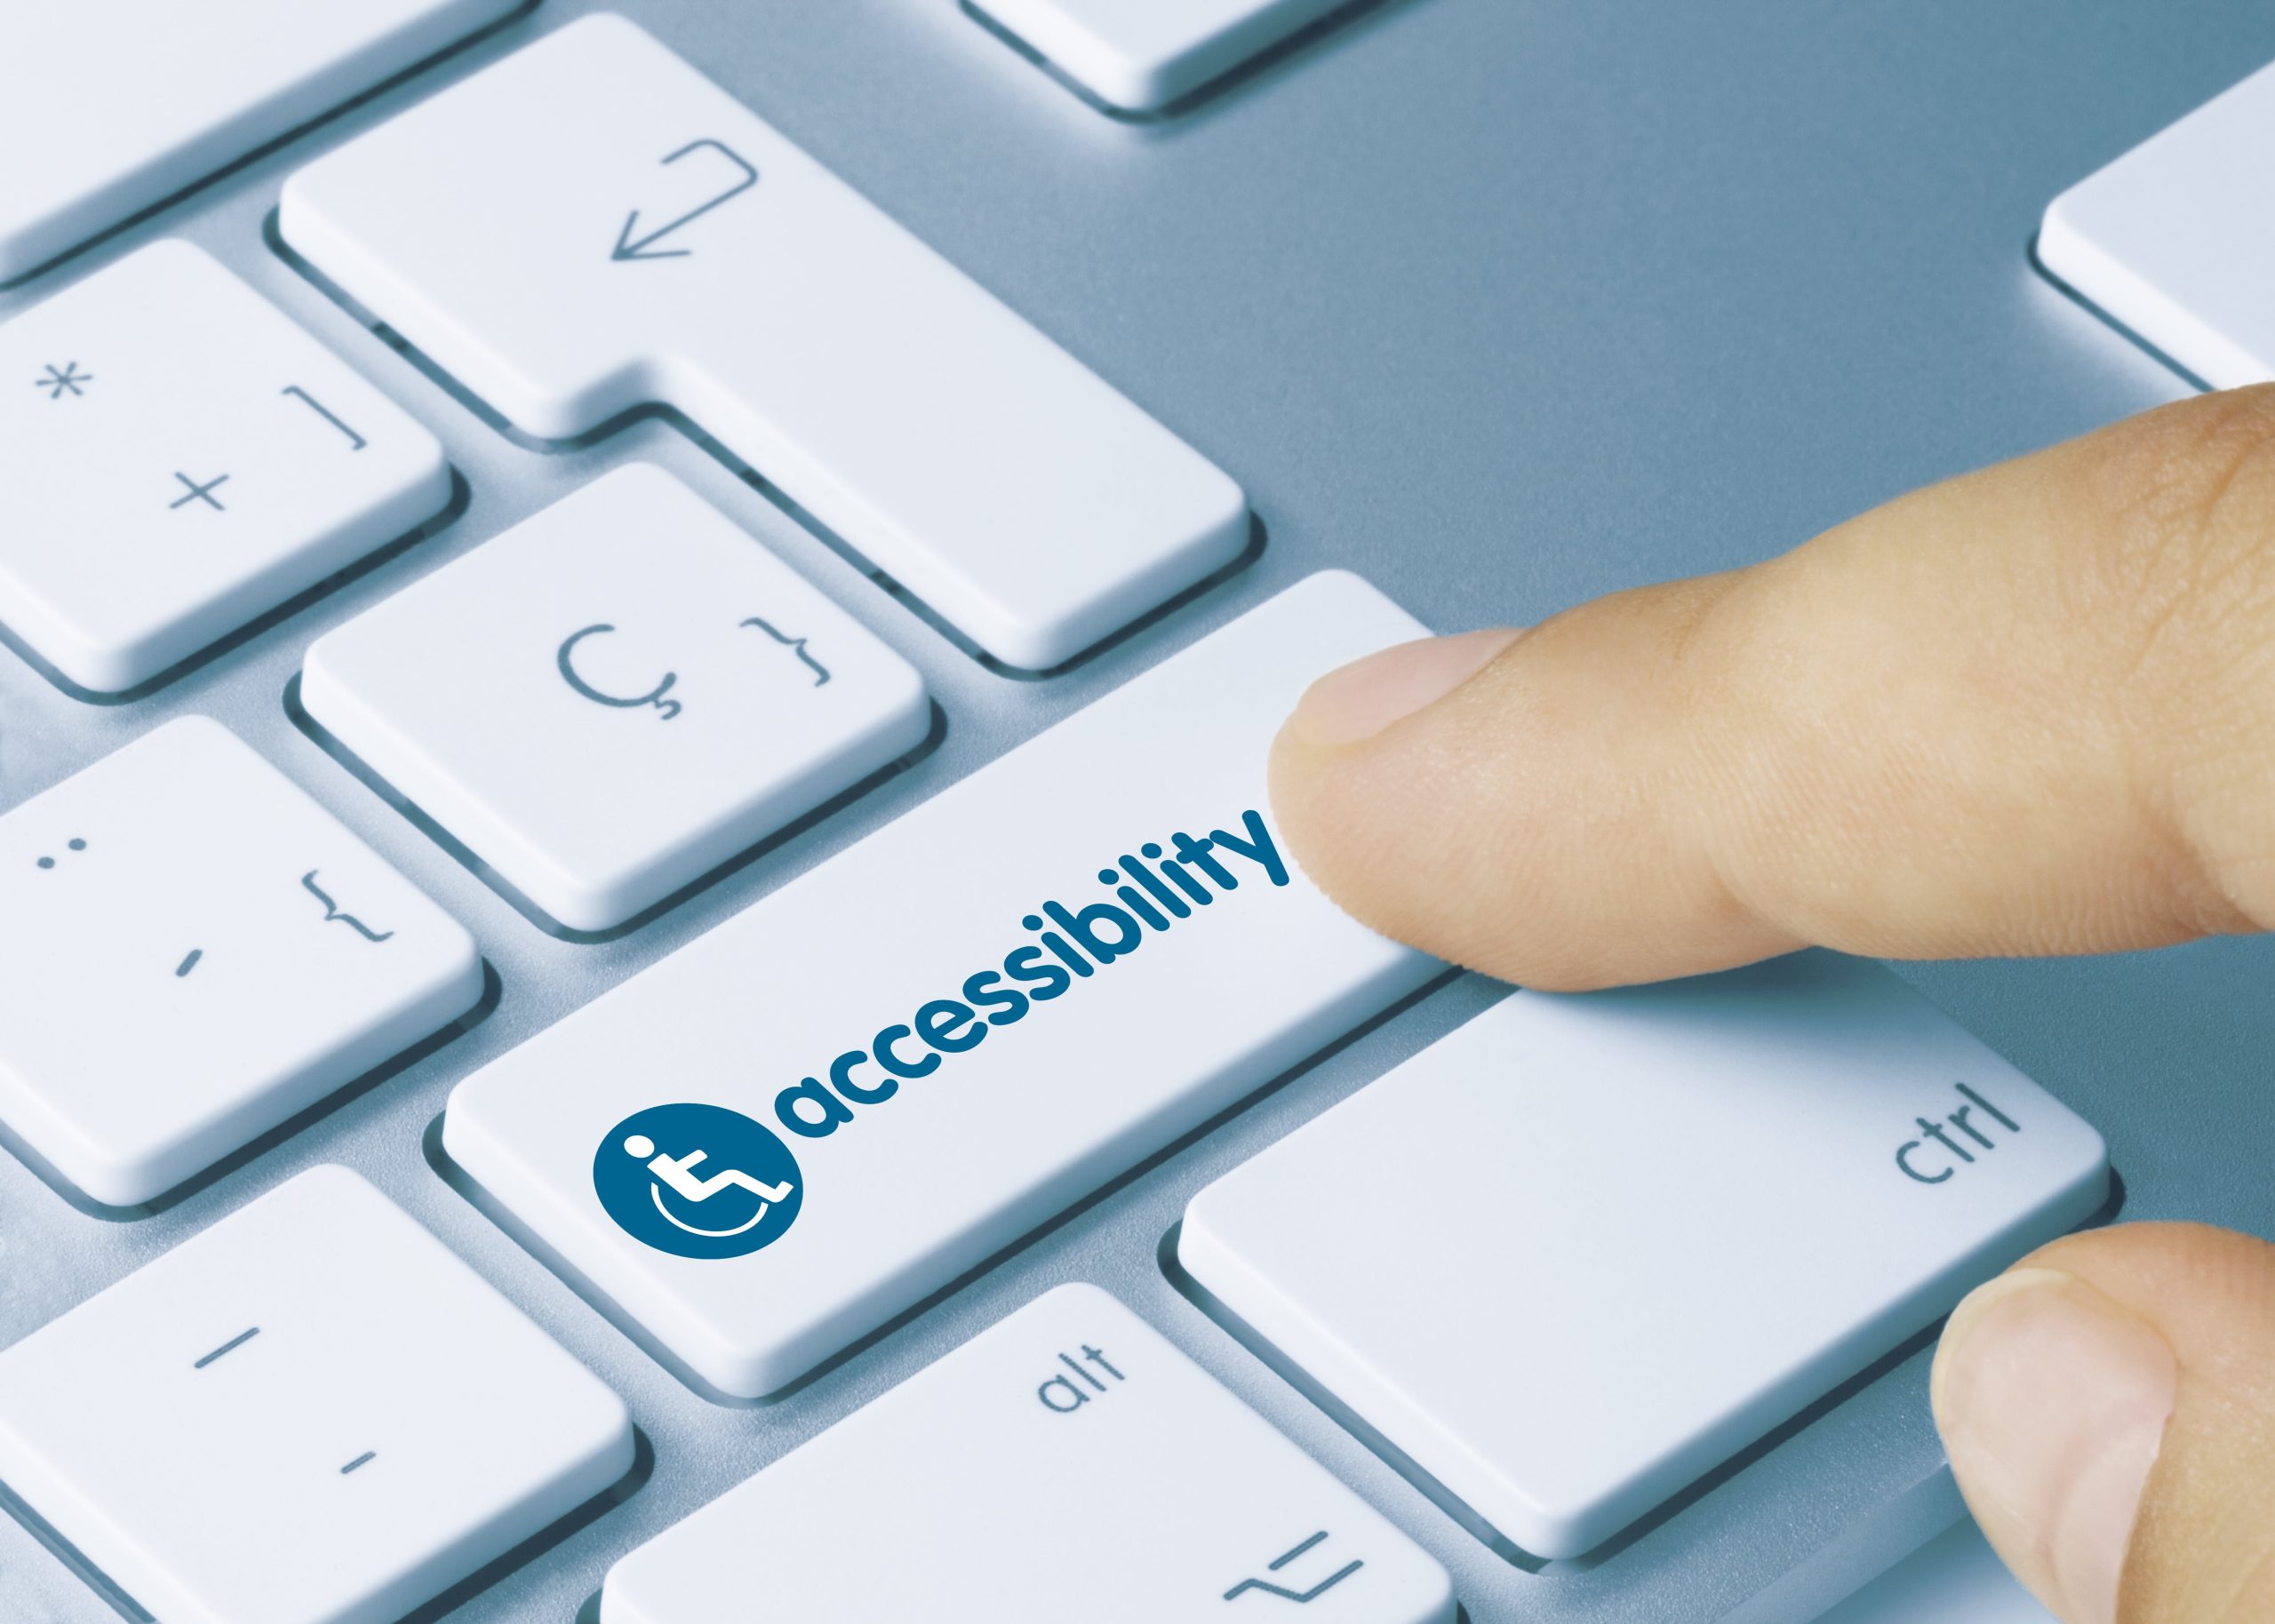 person pressing accessibility button on computer keyboard